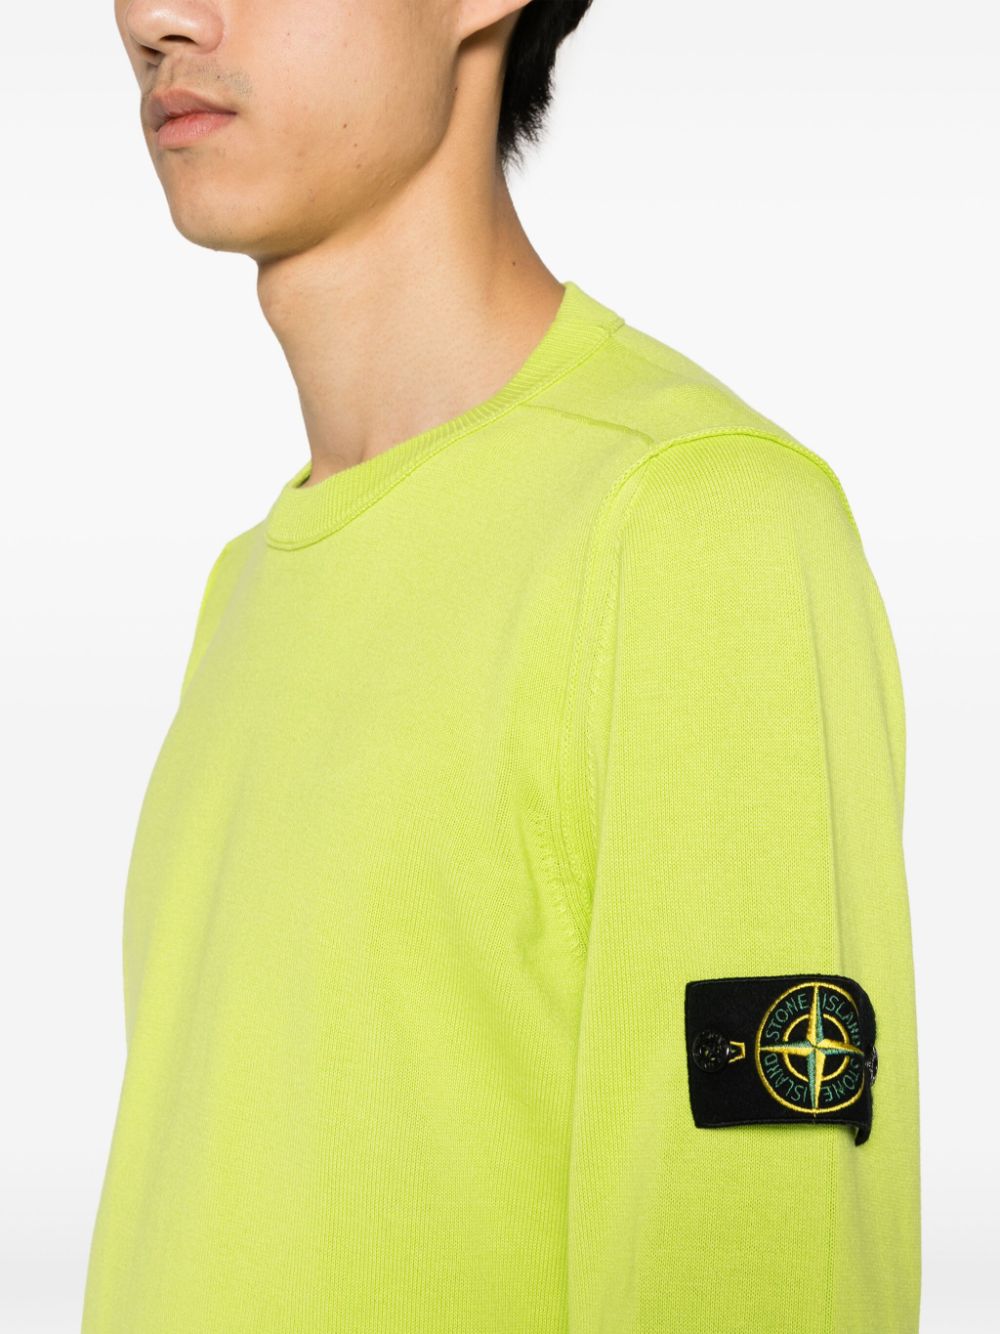 Yellow Compass-badge cotton jumper<BR/><BR/><BR/>